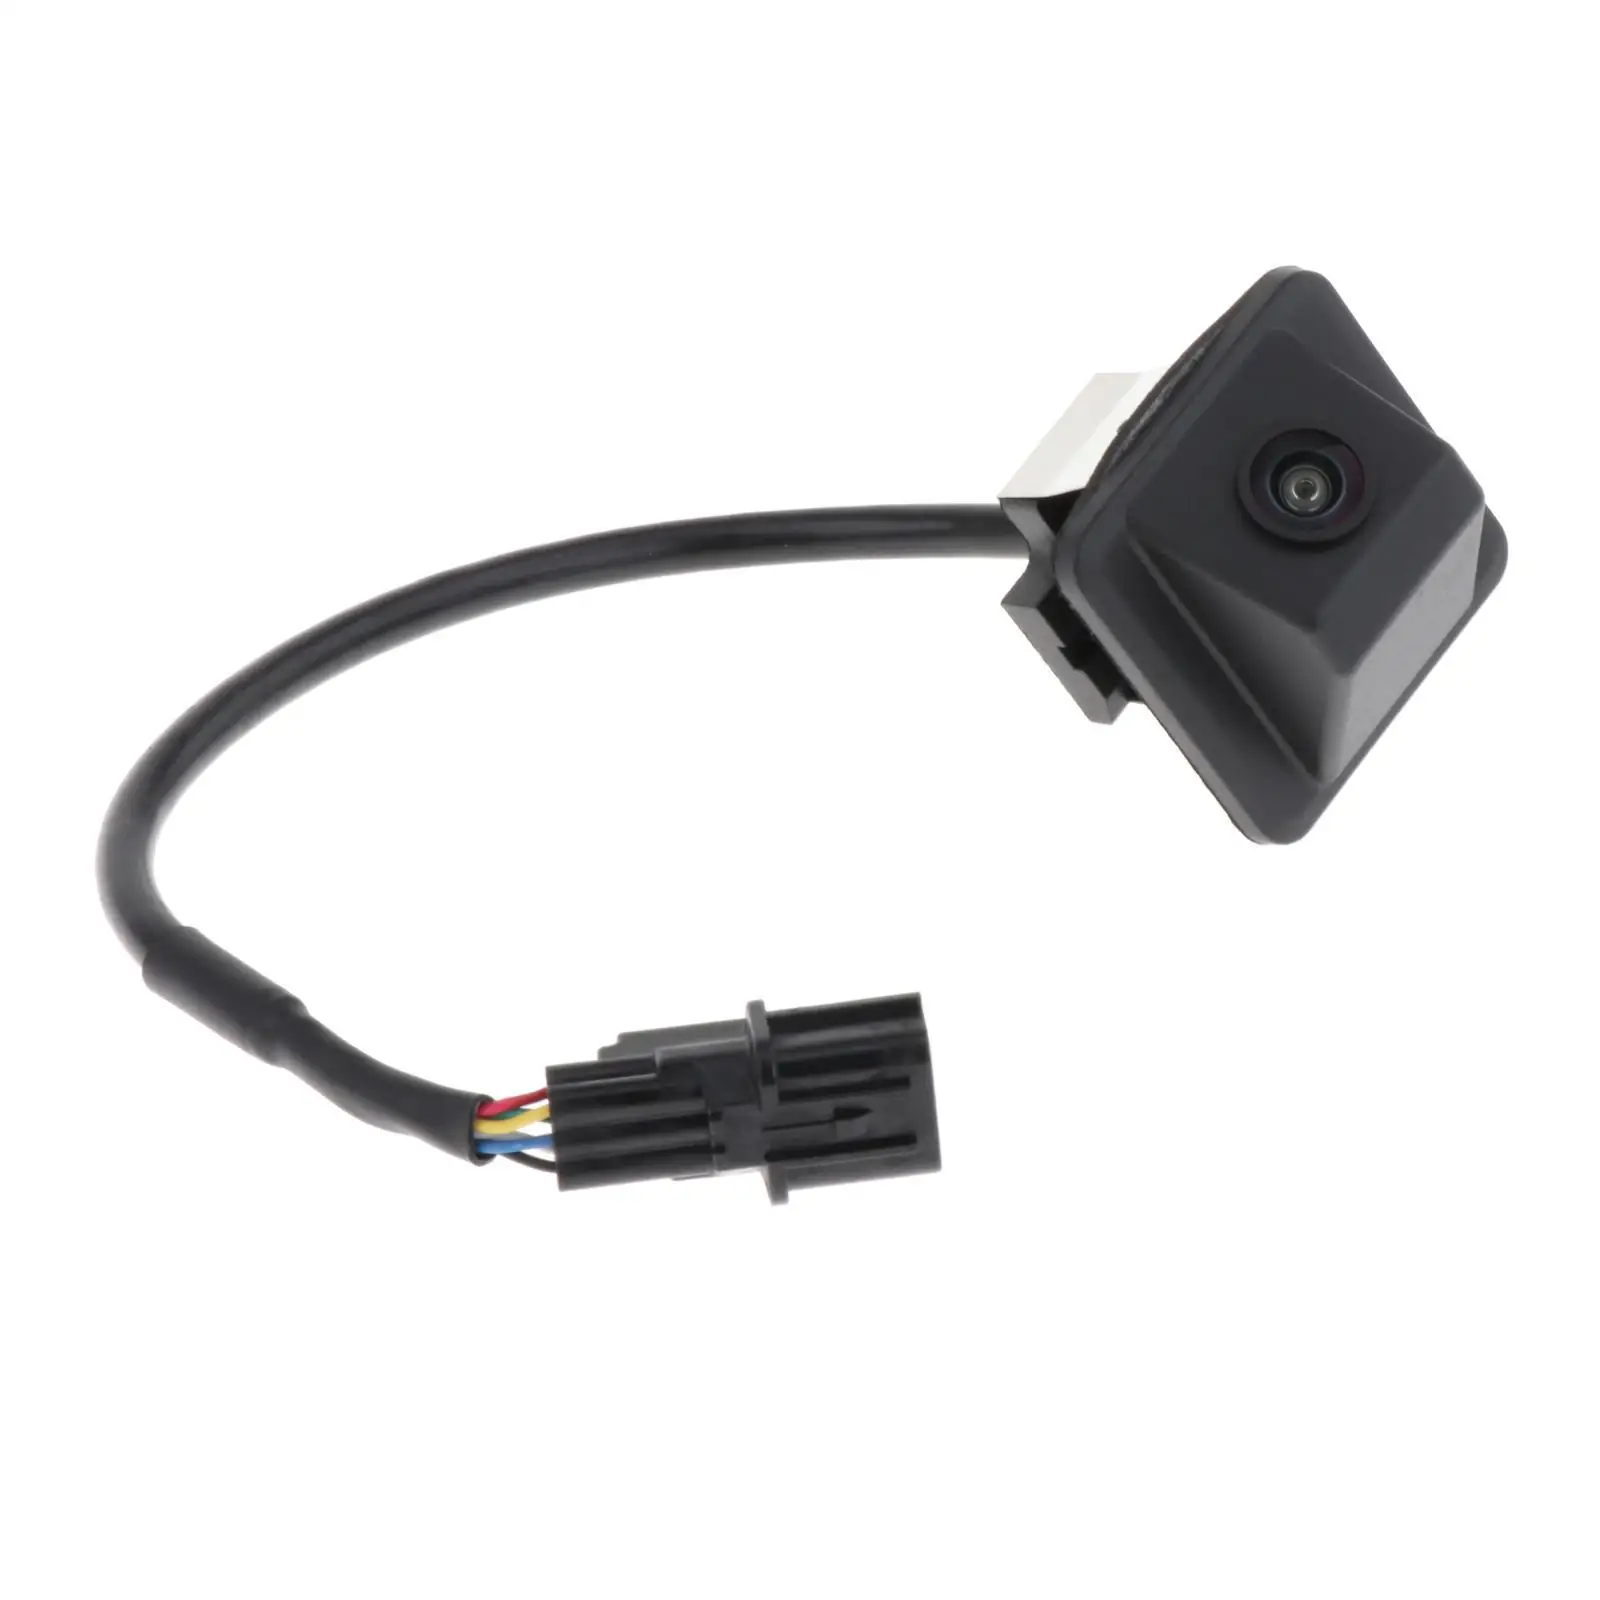 Rear View Back up Camera 95760-2T650 Easily Install Car Backup Camera for Kia Optima 2014 to 2015 Assembly Replacement